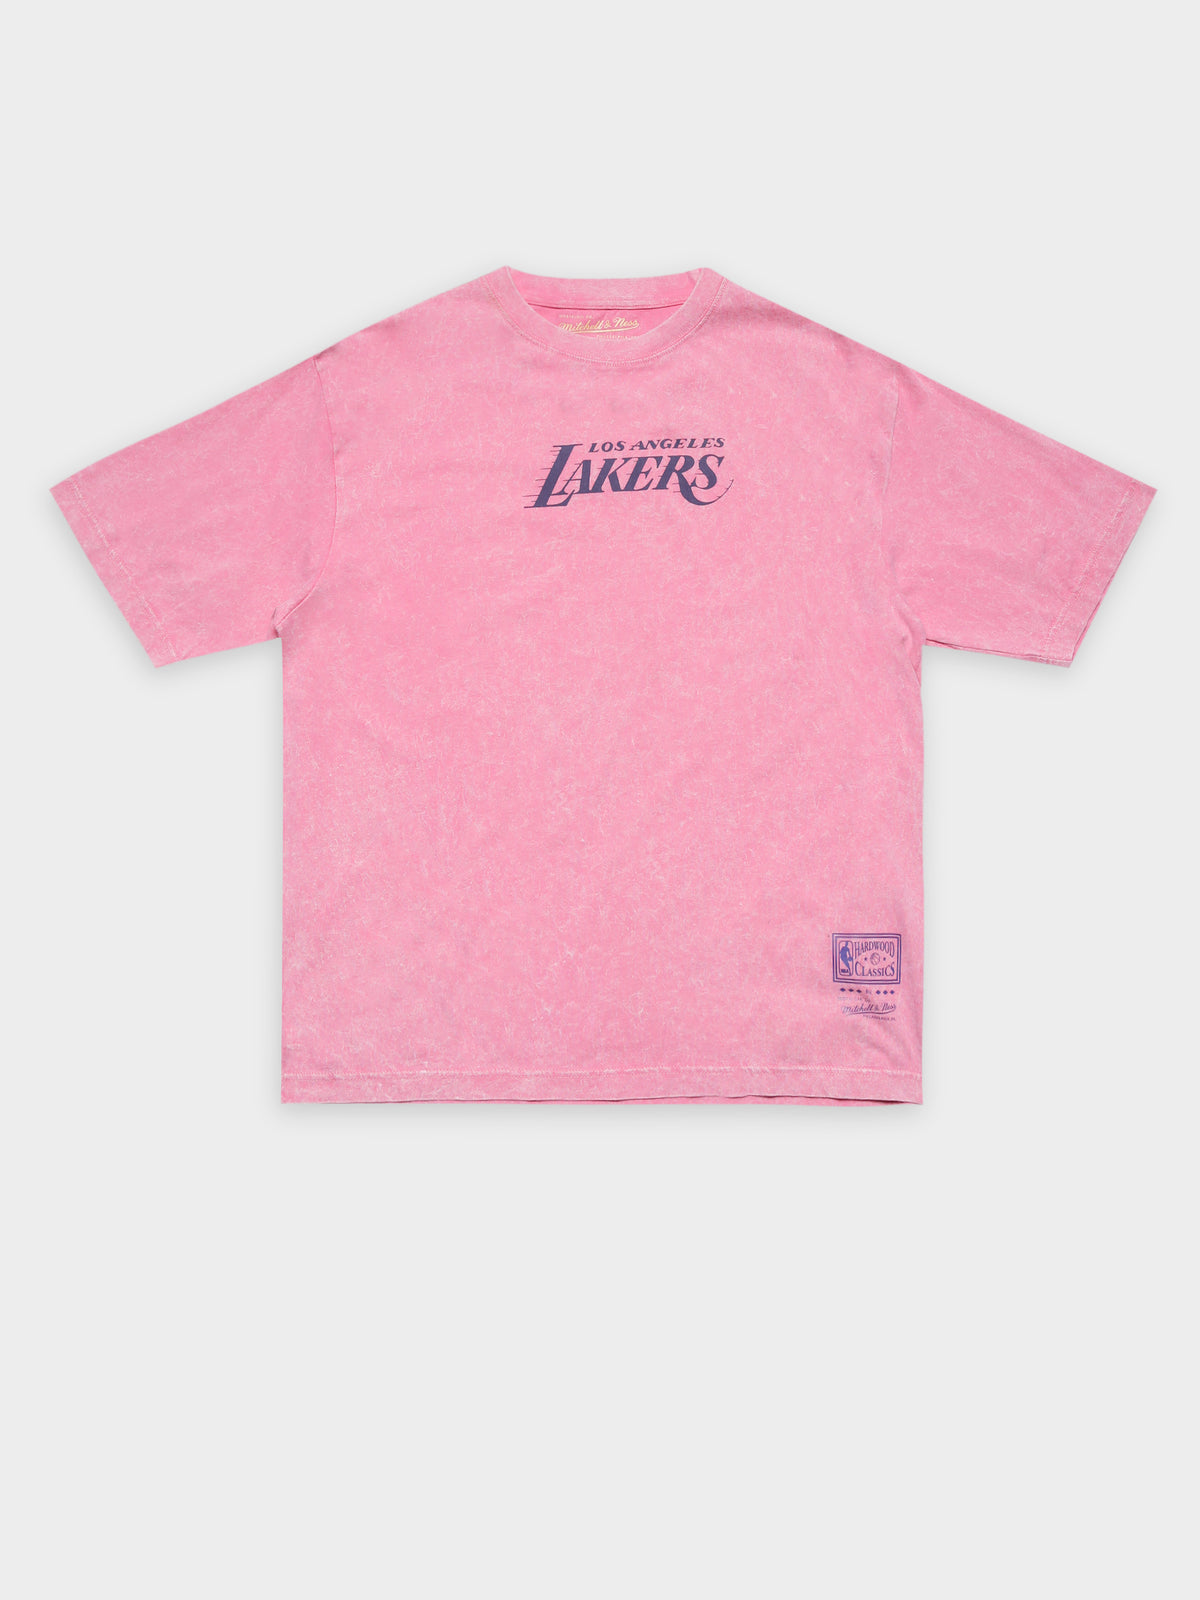 Old School 1987 Lakers T-Shirt in Rose